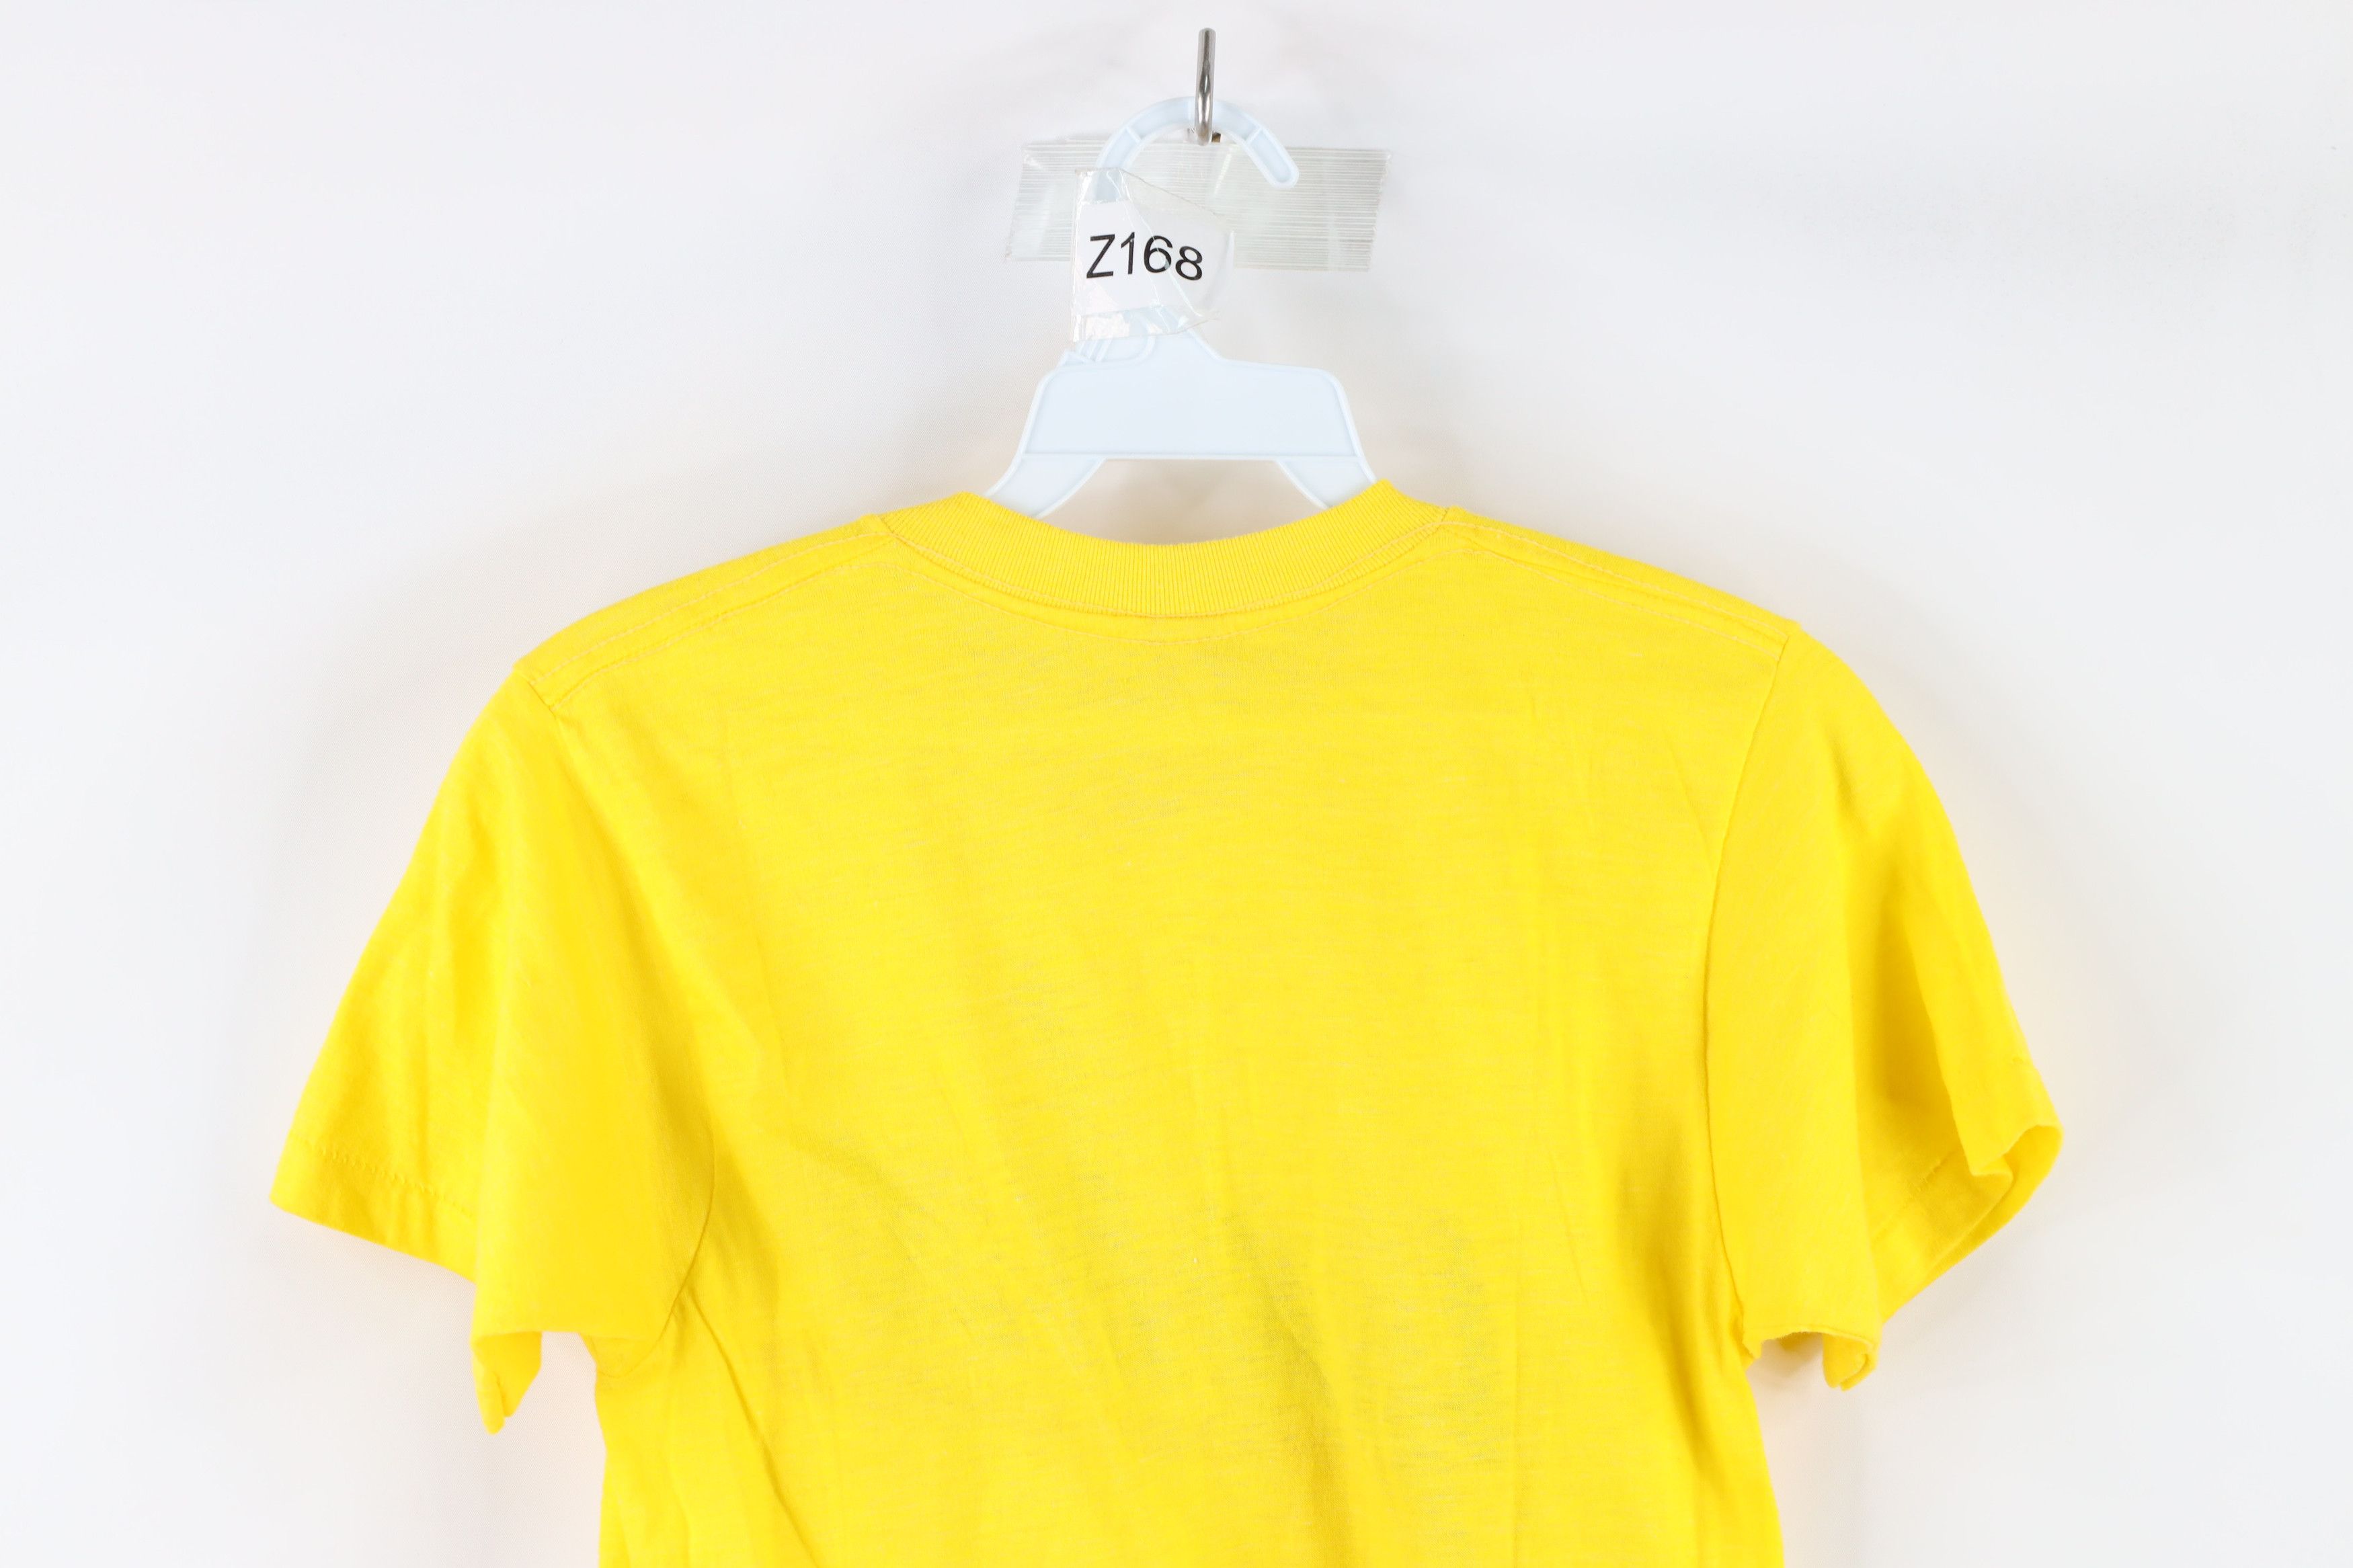 Vintage Vintage 80s YooHoo Chocolate Drink Out T-Shirt Yellow USA Size S / US 4 / IT 40 - 7 Thumbnail